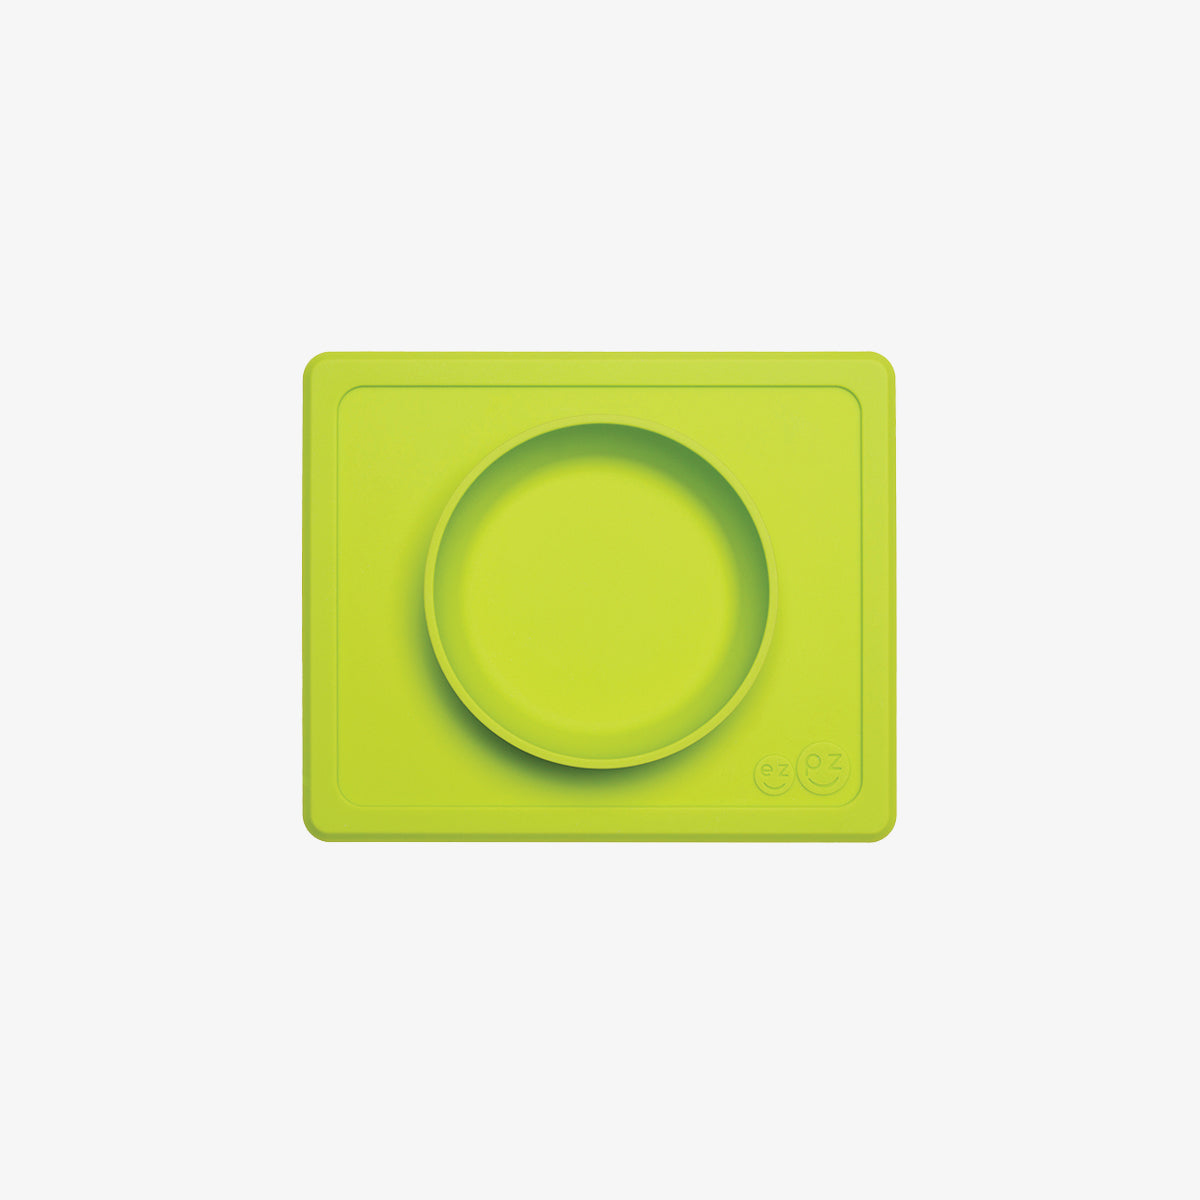 Mini Bowl in Lime by ezpz / The Original All-In-One Silicone Plates & Placemats that Stick to the Table